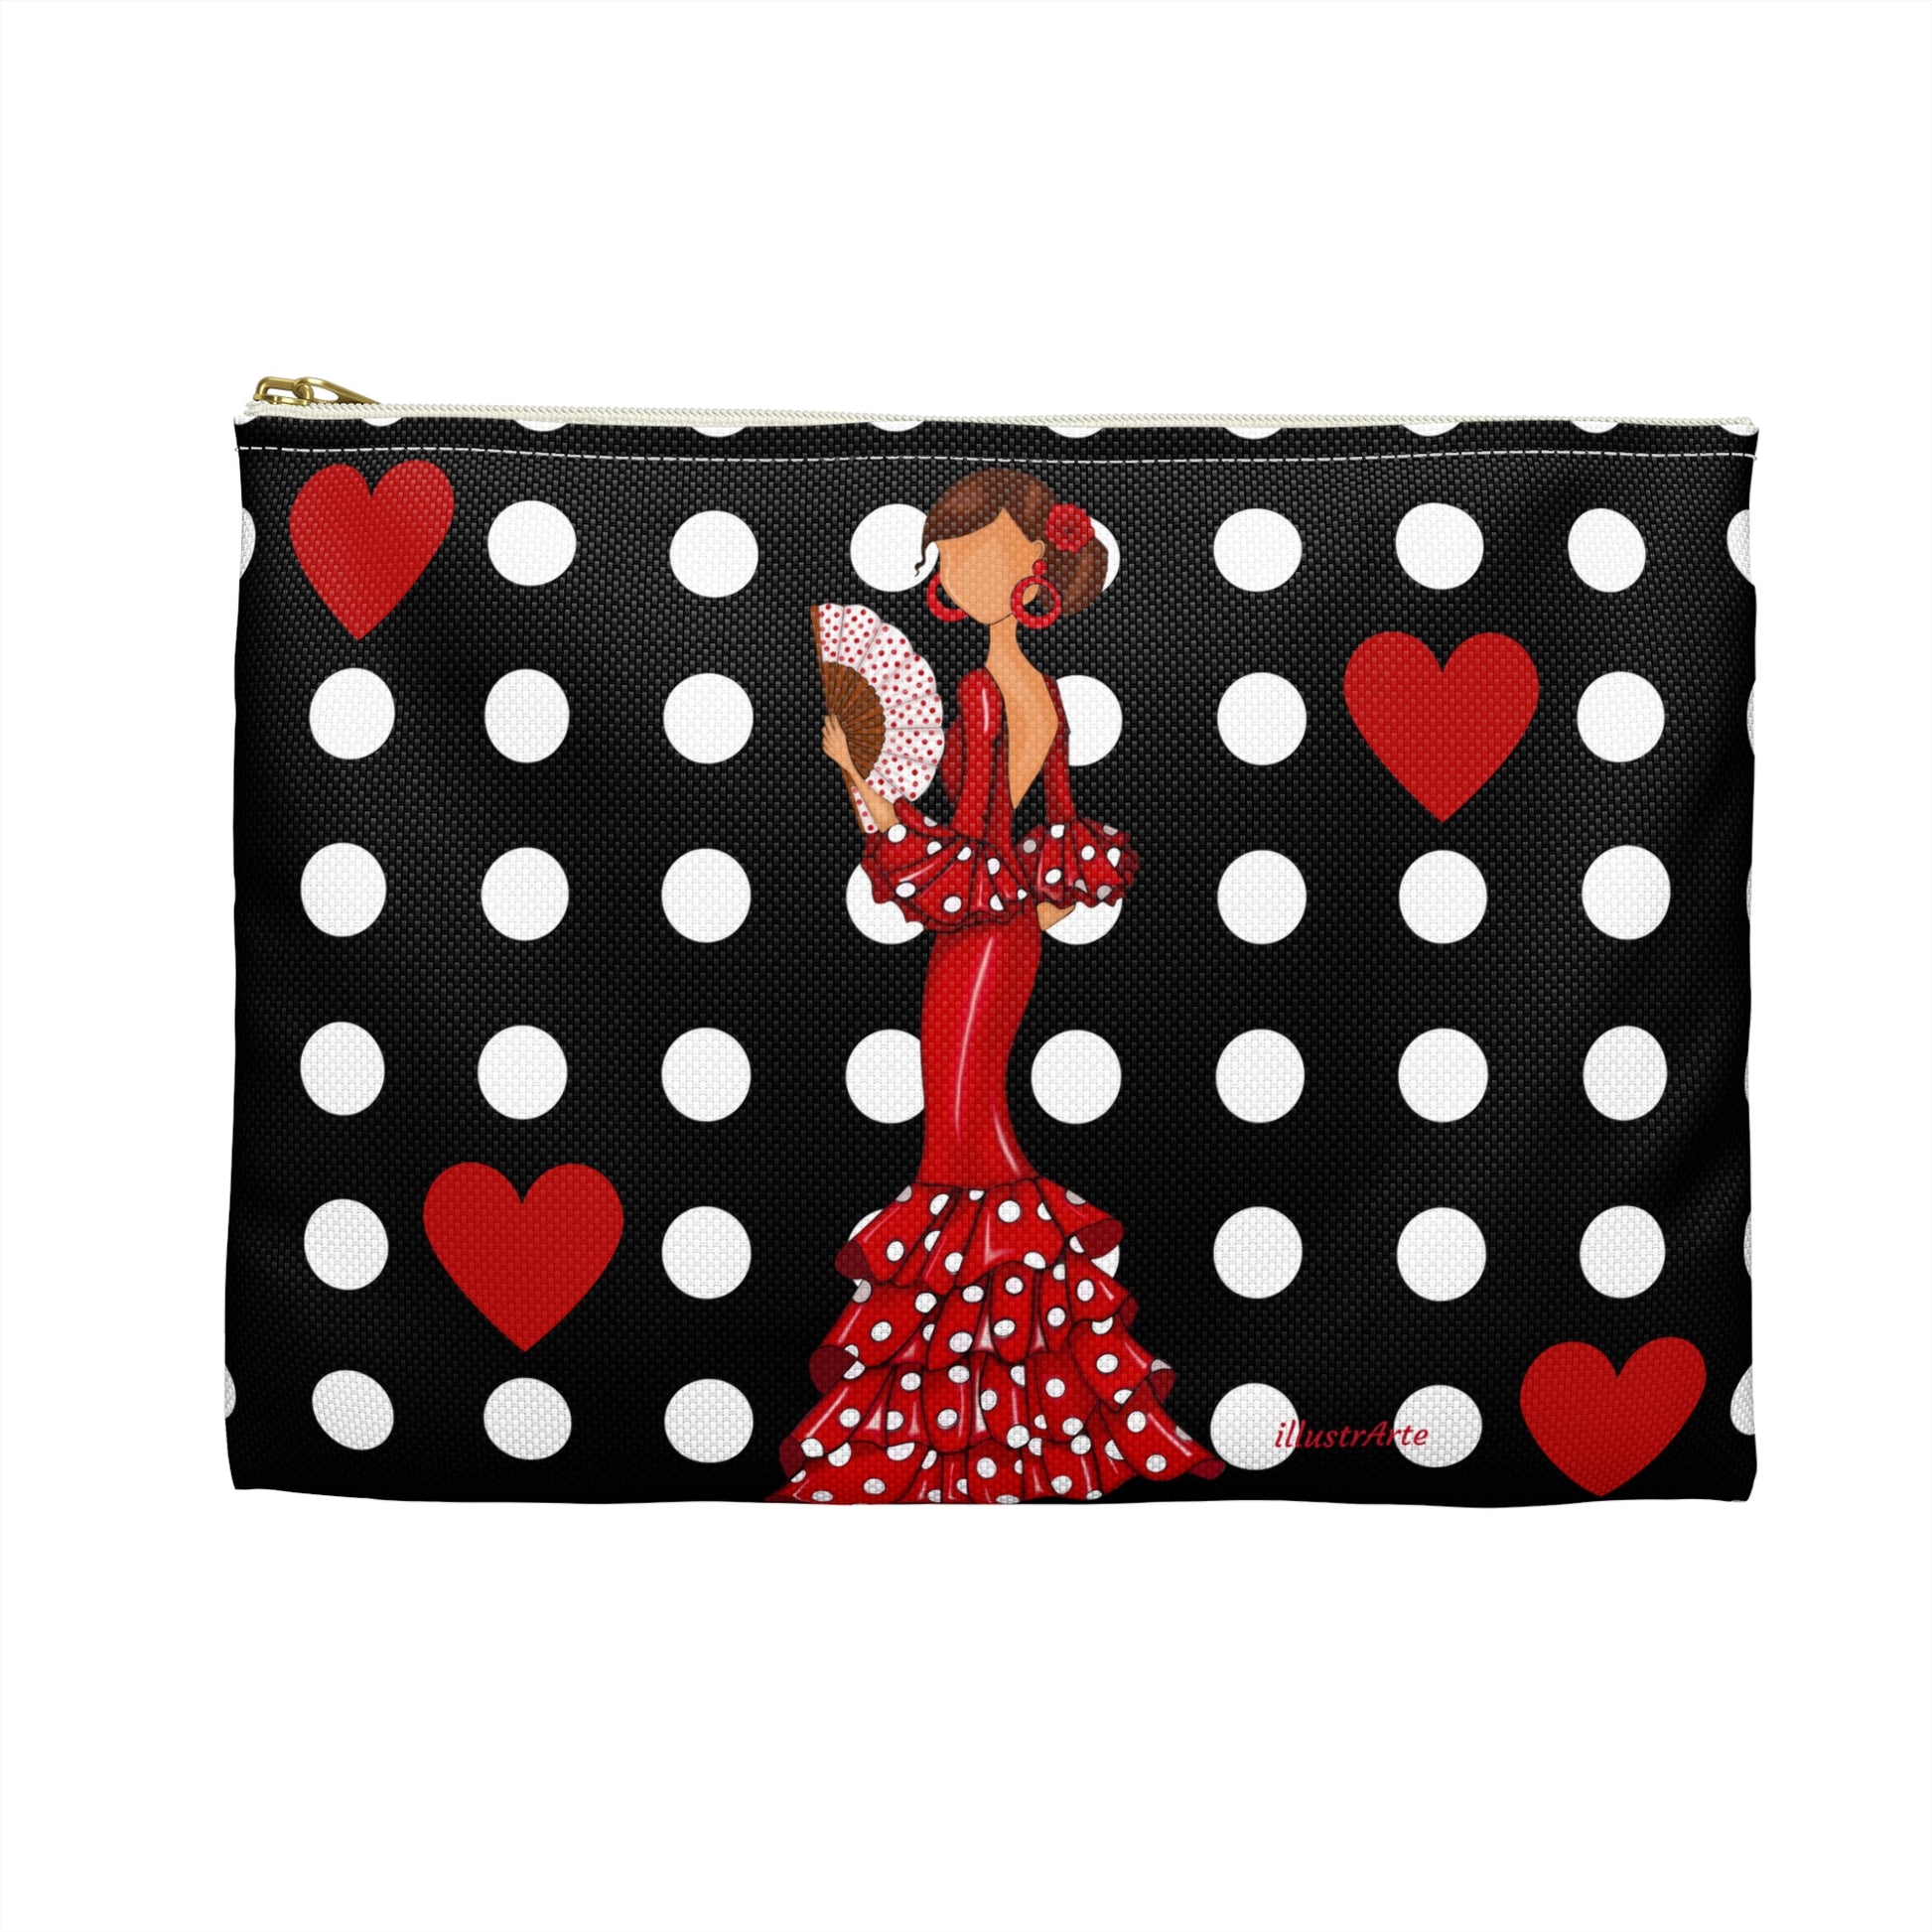 a black and white polka dot purse with a woman in a red dress holding a